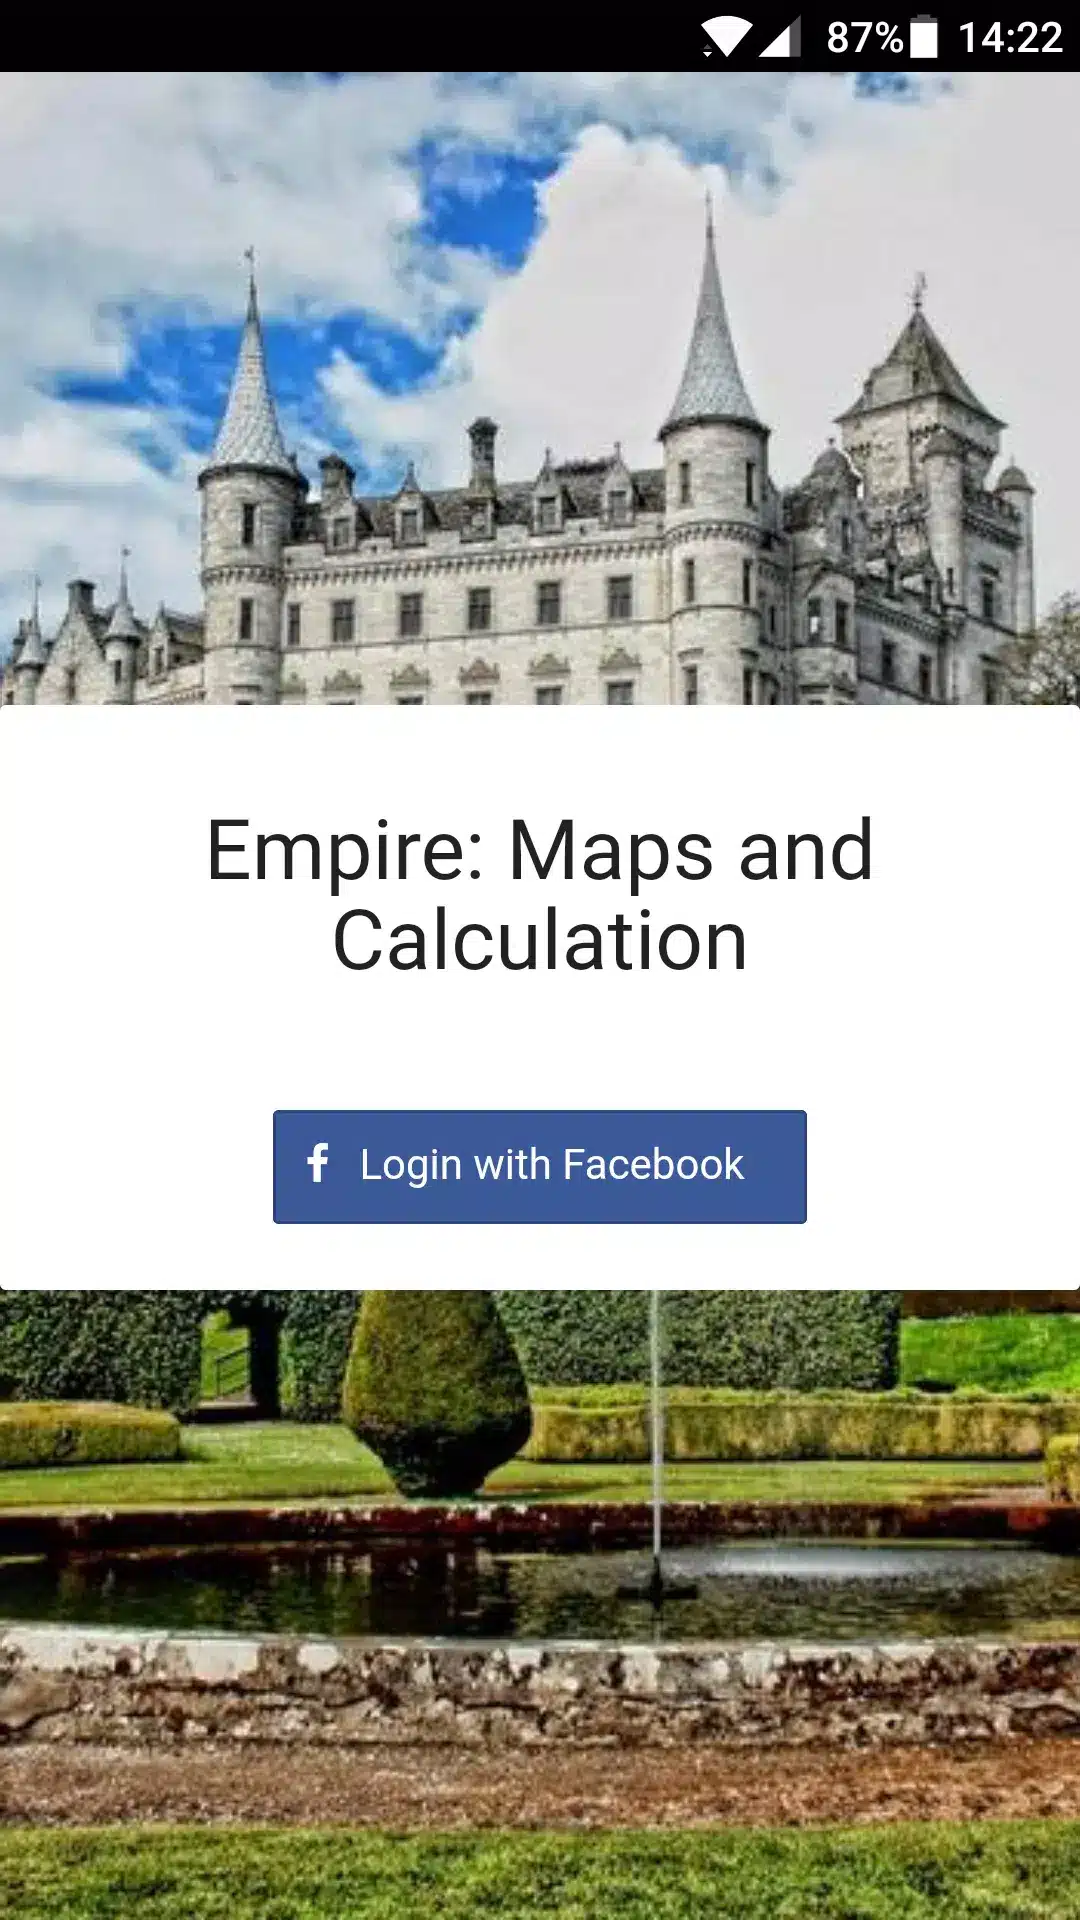 Empire Four Kingdoms: Maps and Calculations Image 1